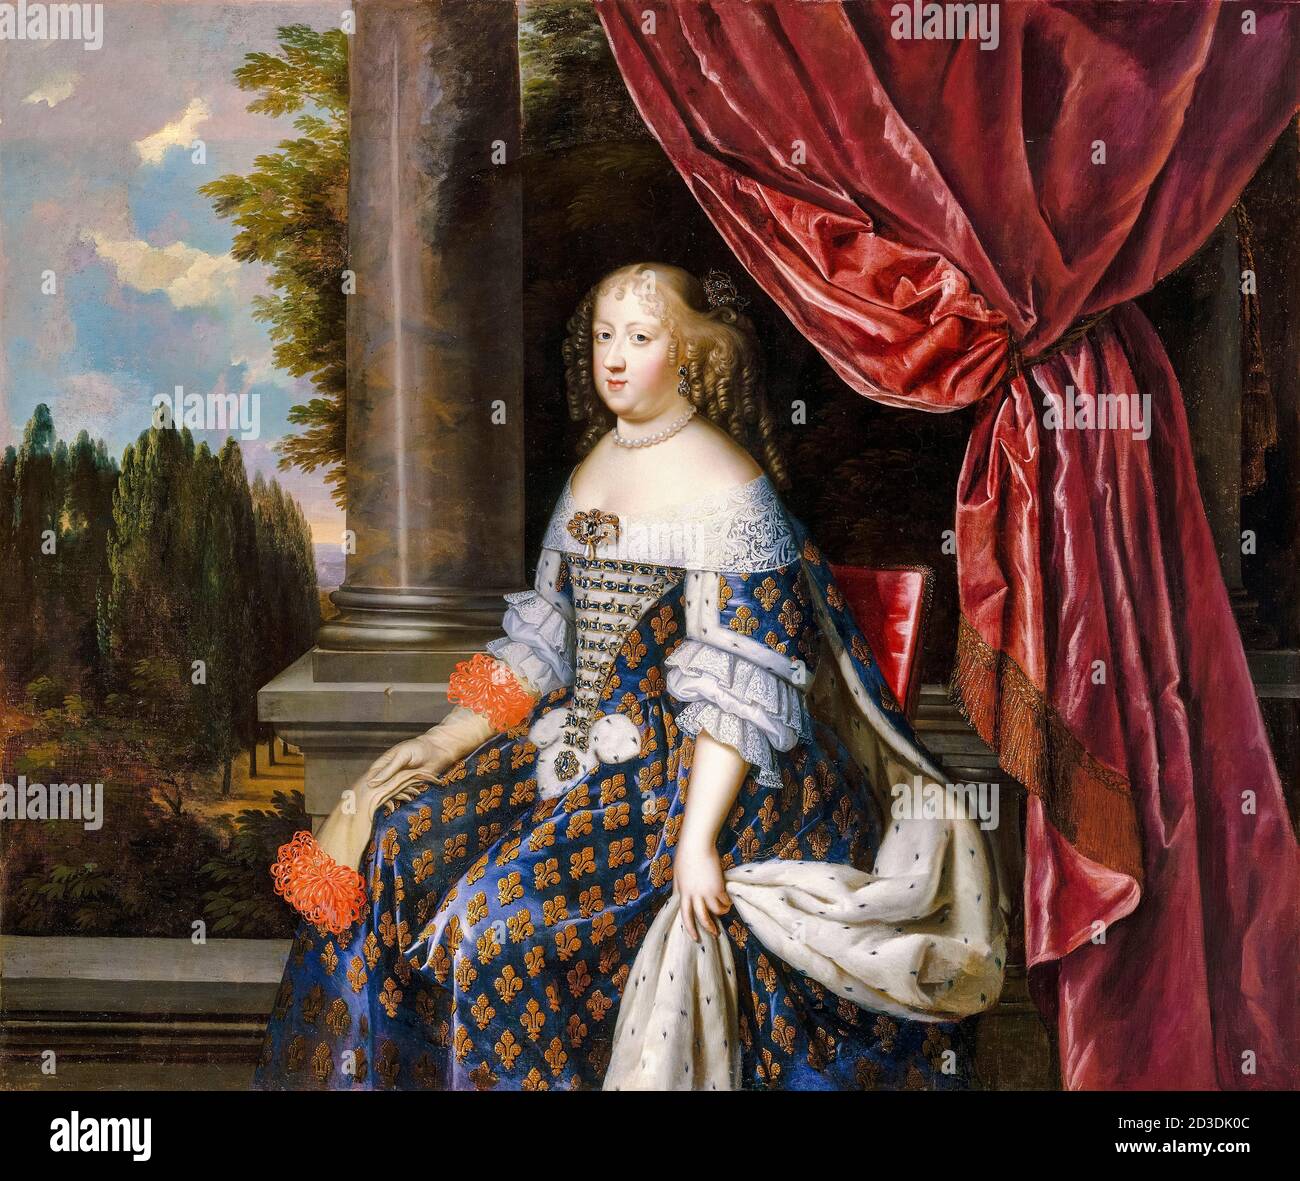 Maria Theresa of Spain (1638-1683), Queen Consort of France, portrait painting by Jean Nocret, circa 1660 Stock Photo